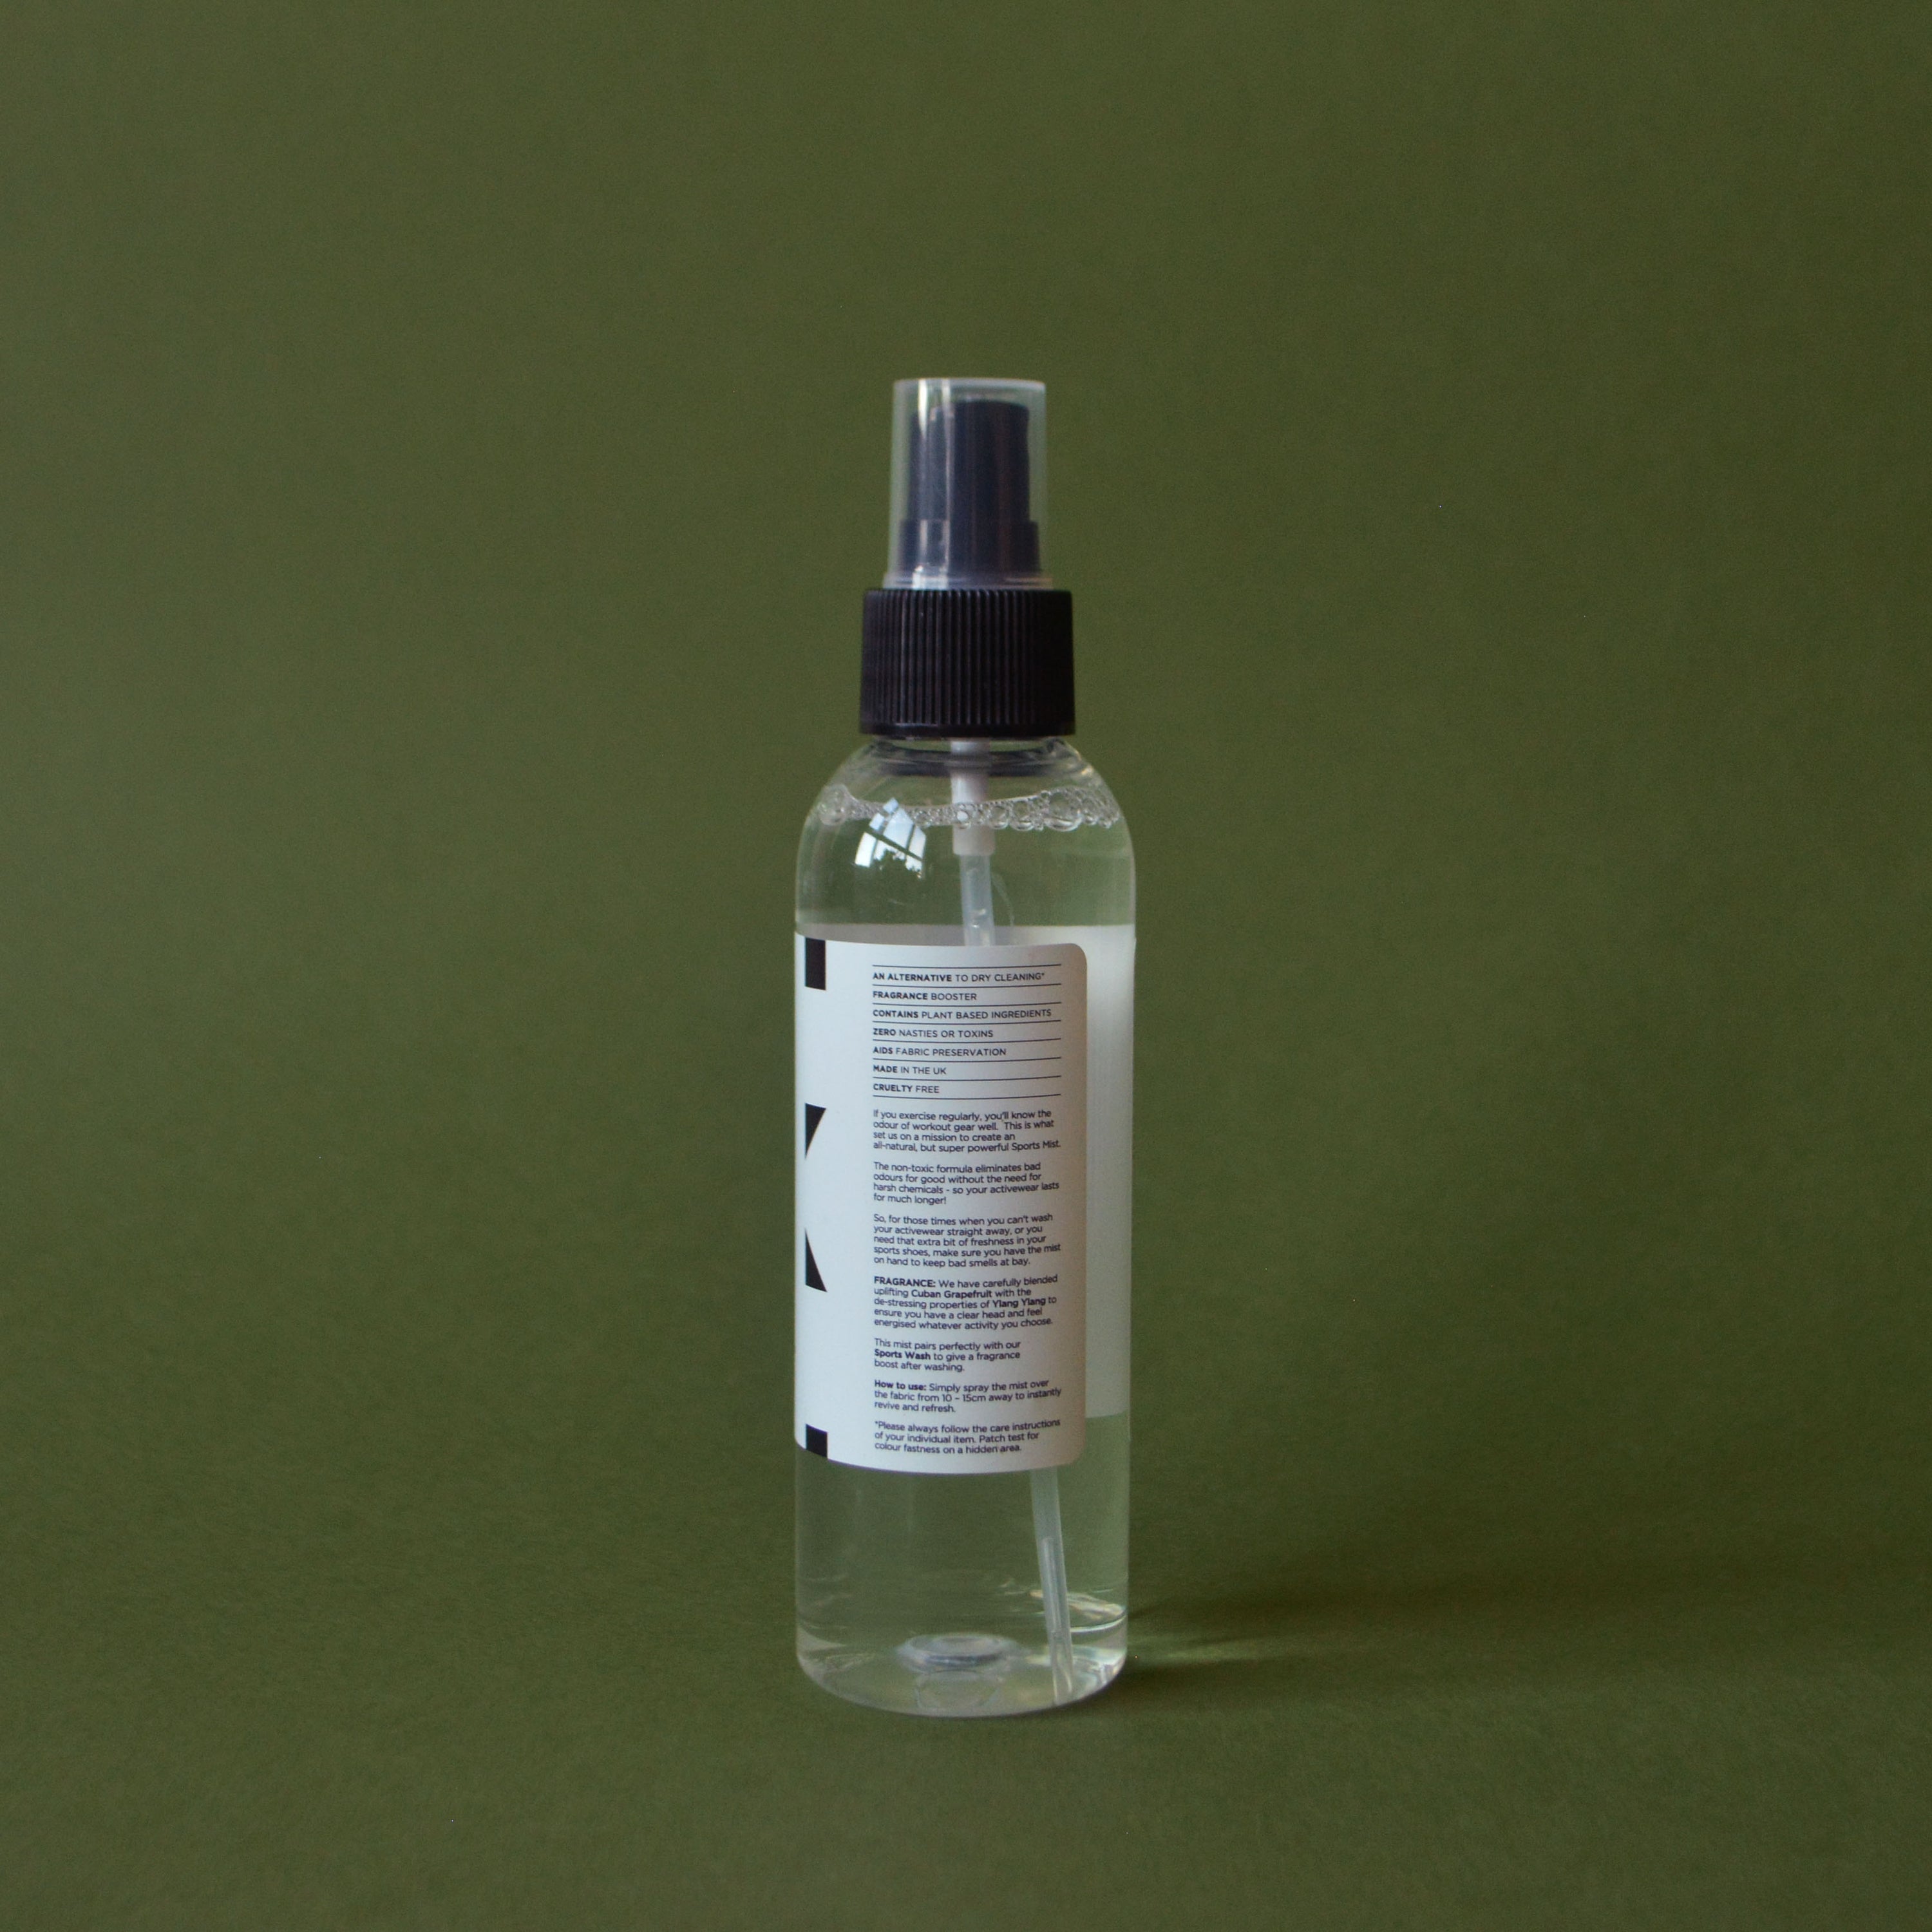 The Lab Co. | Sports Laundry Mist